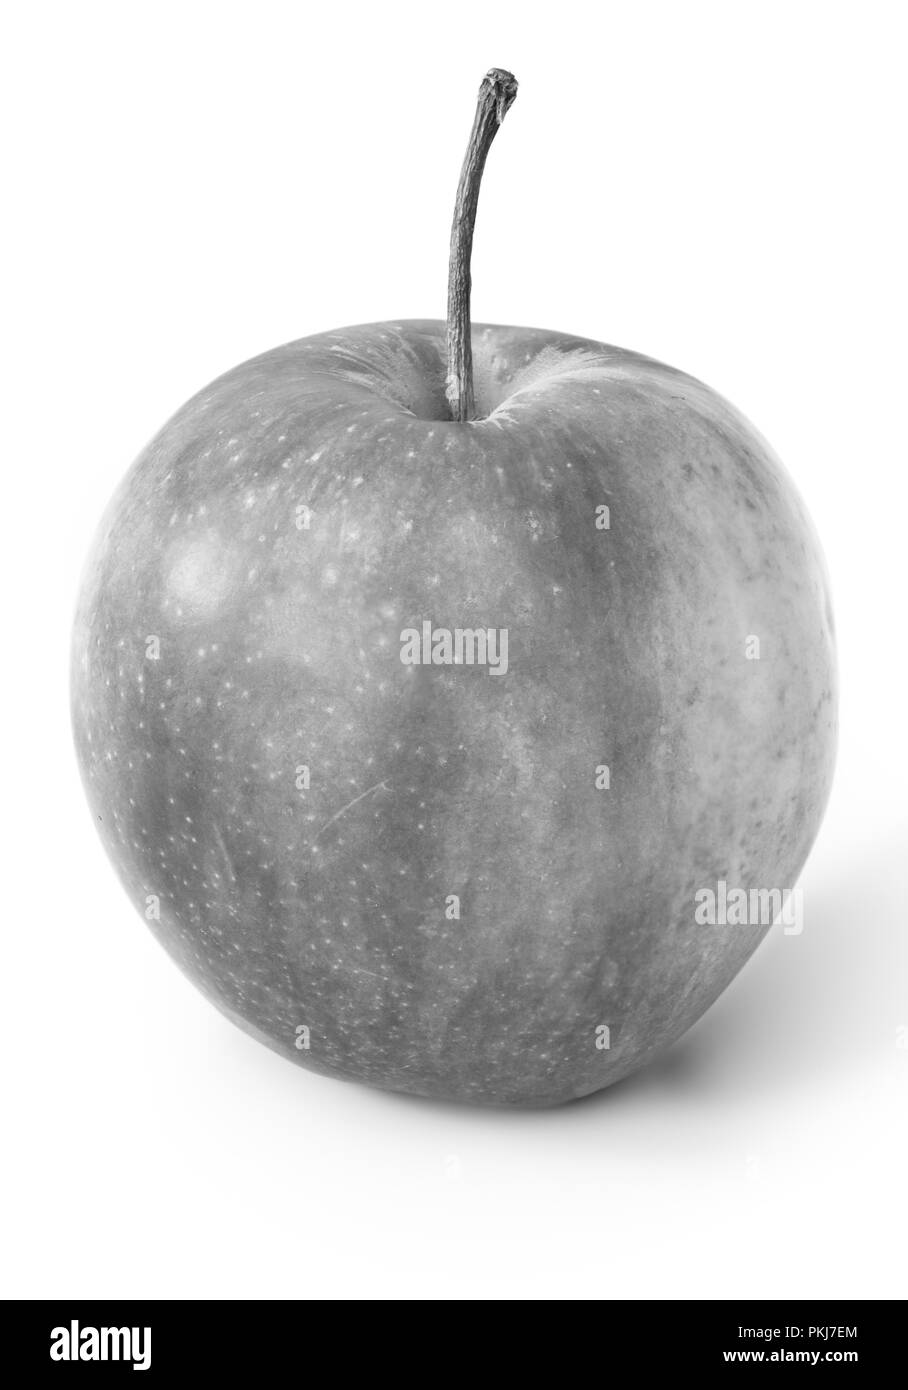 Black and white picture of an apple against a white background Stock Photo